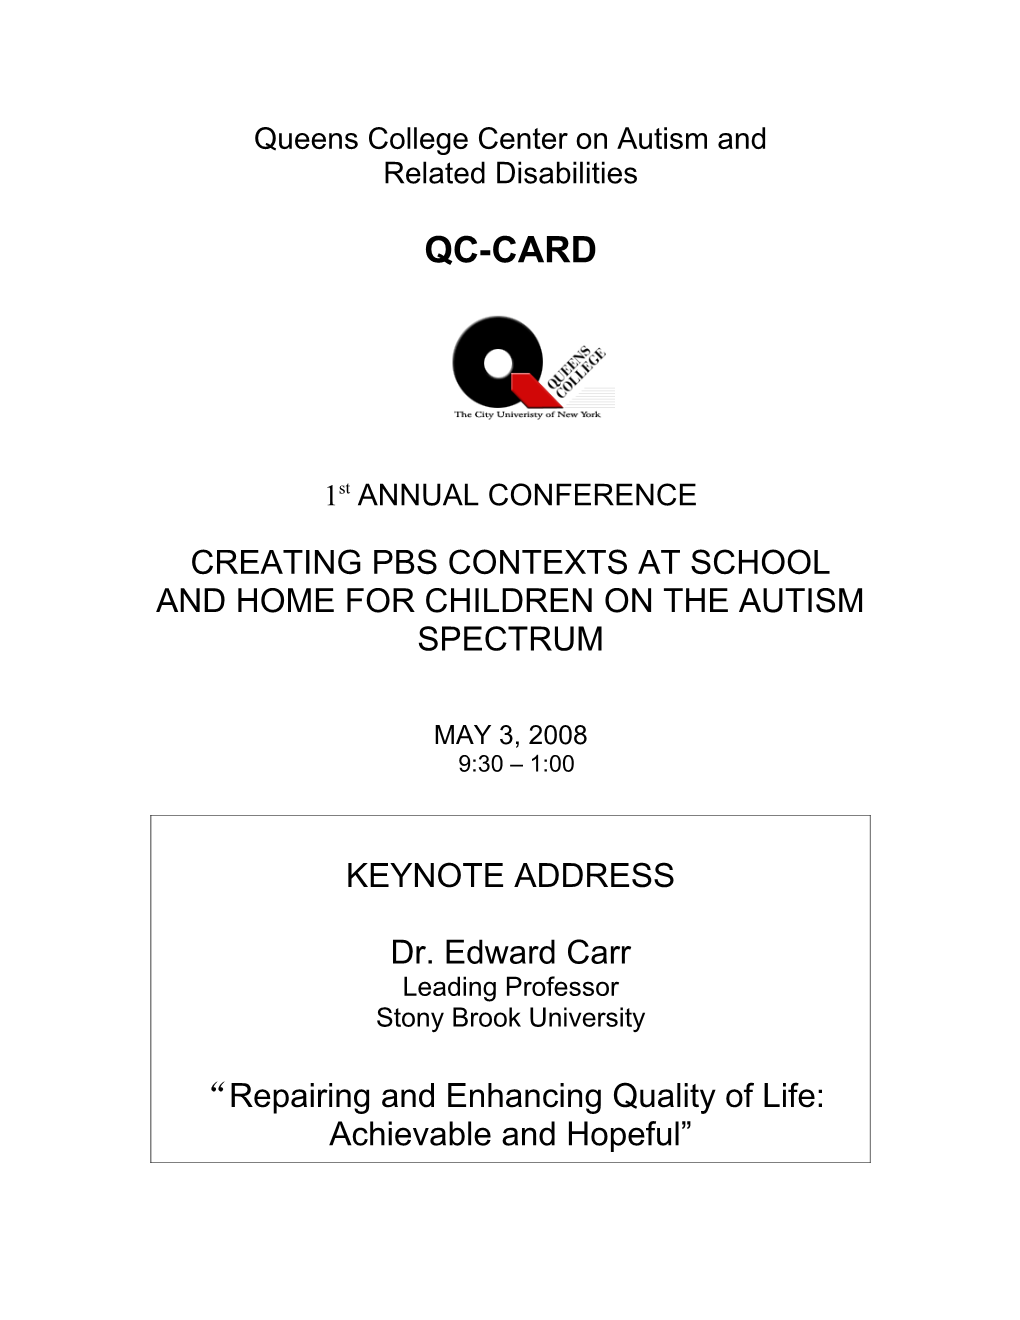 Queens College Center on Autism And